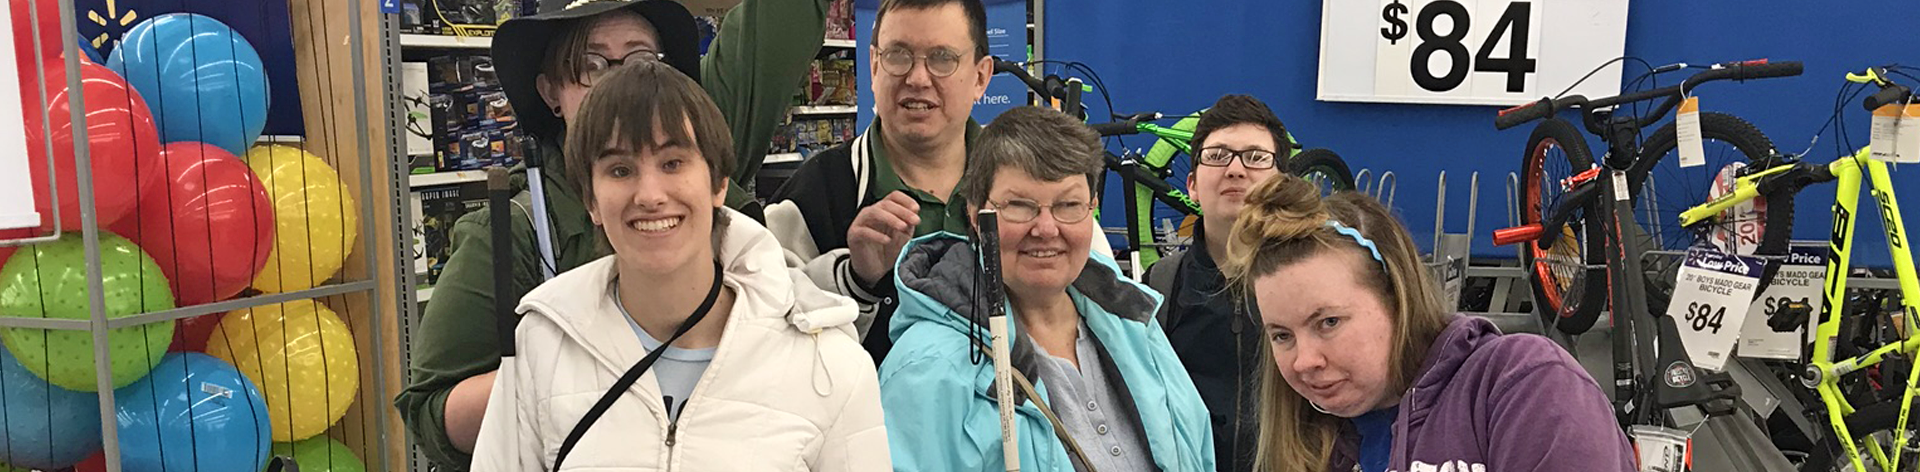 Utah chapter members smile together during a shopping trip.